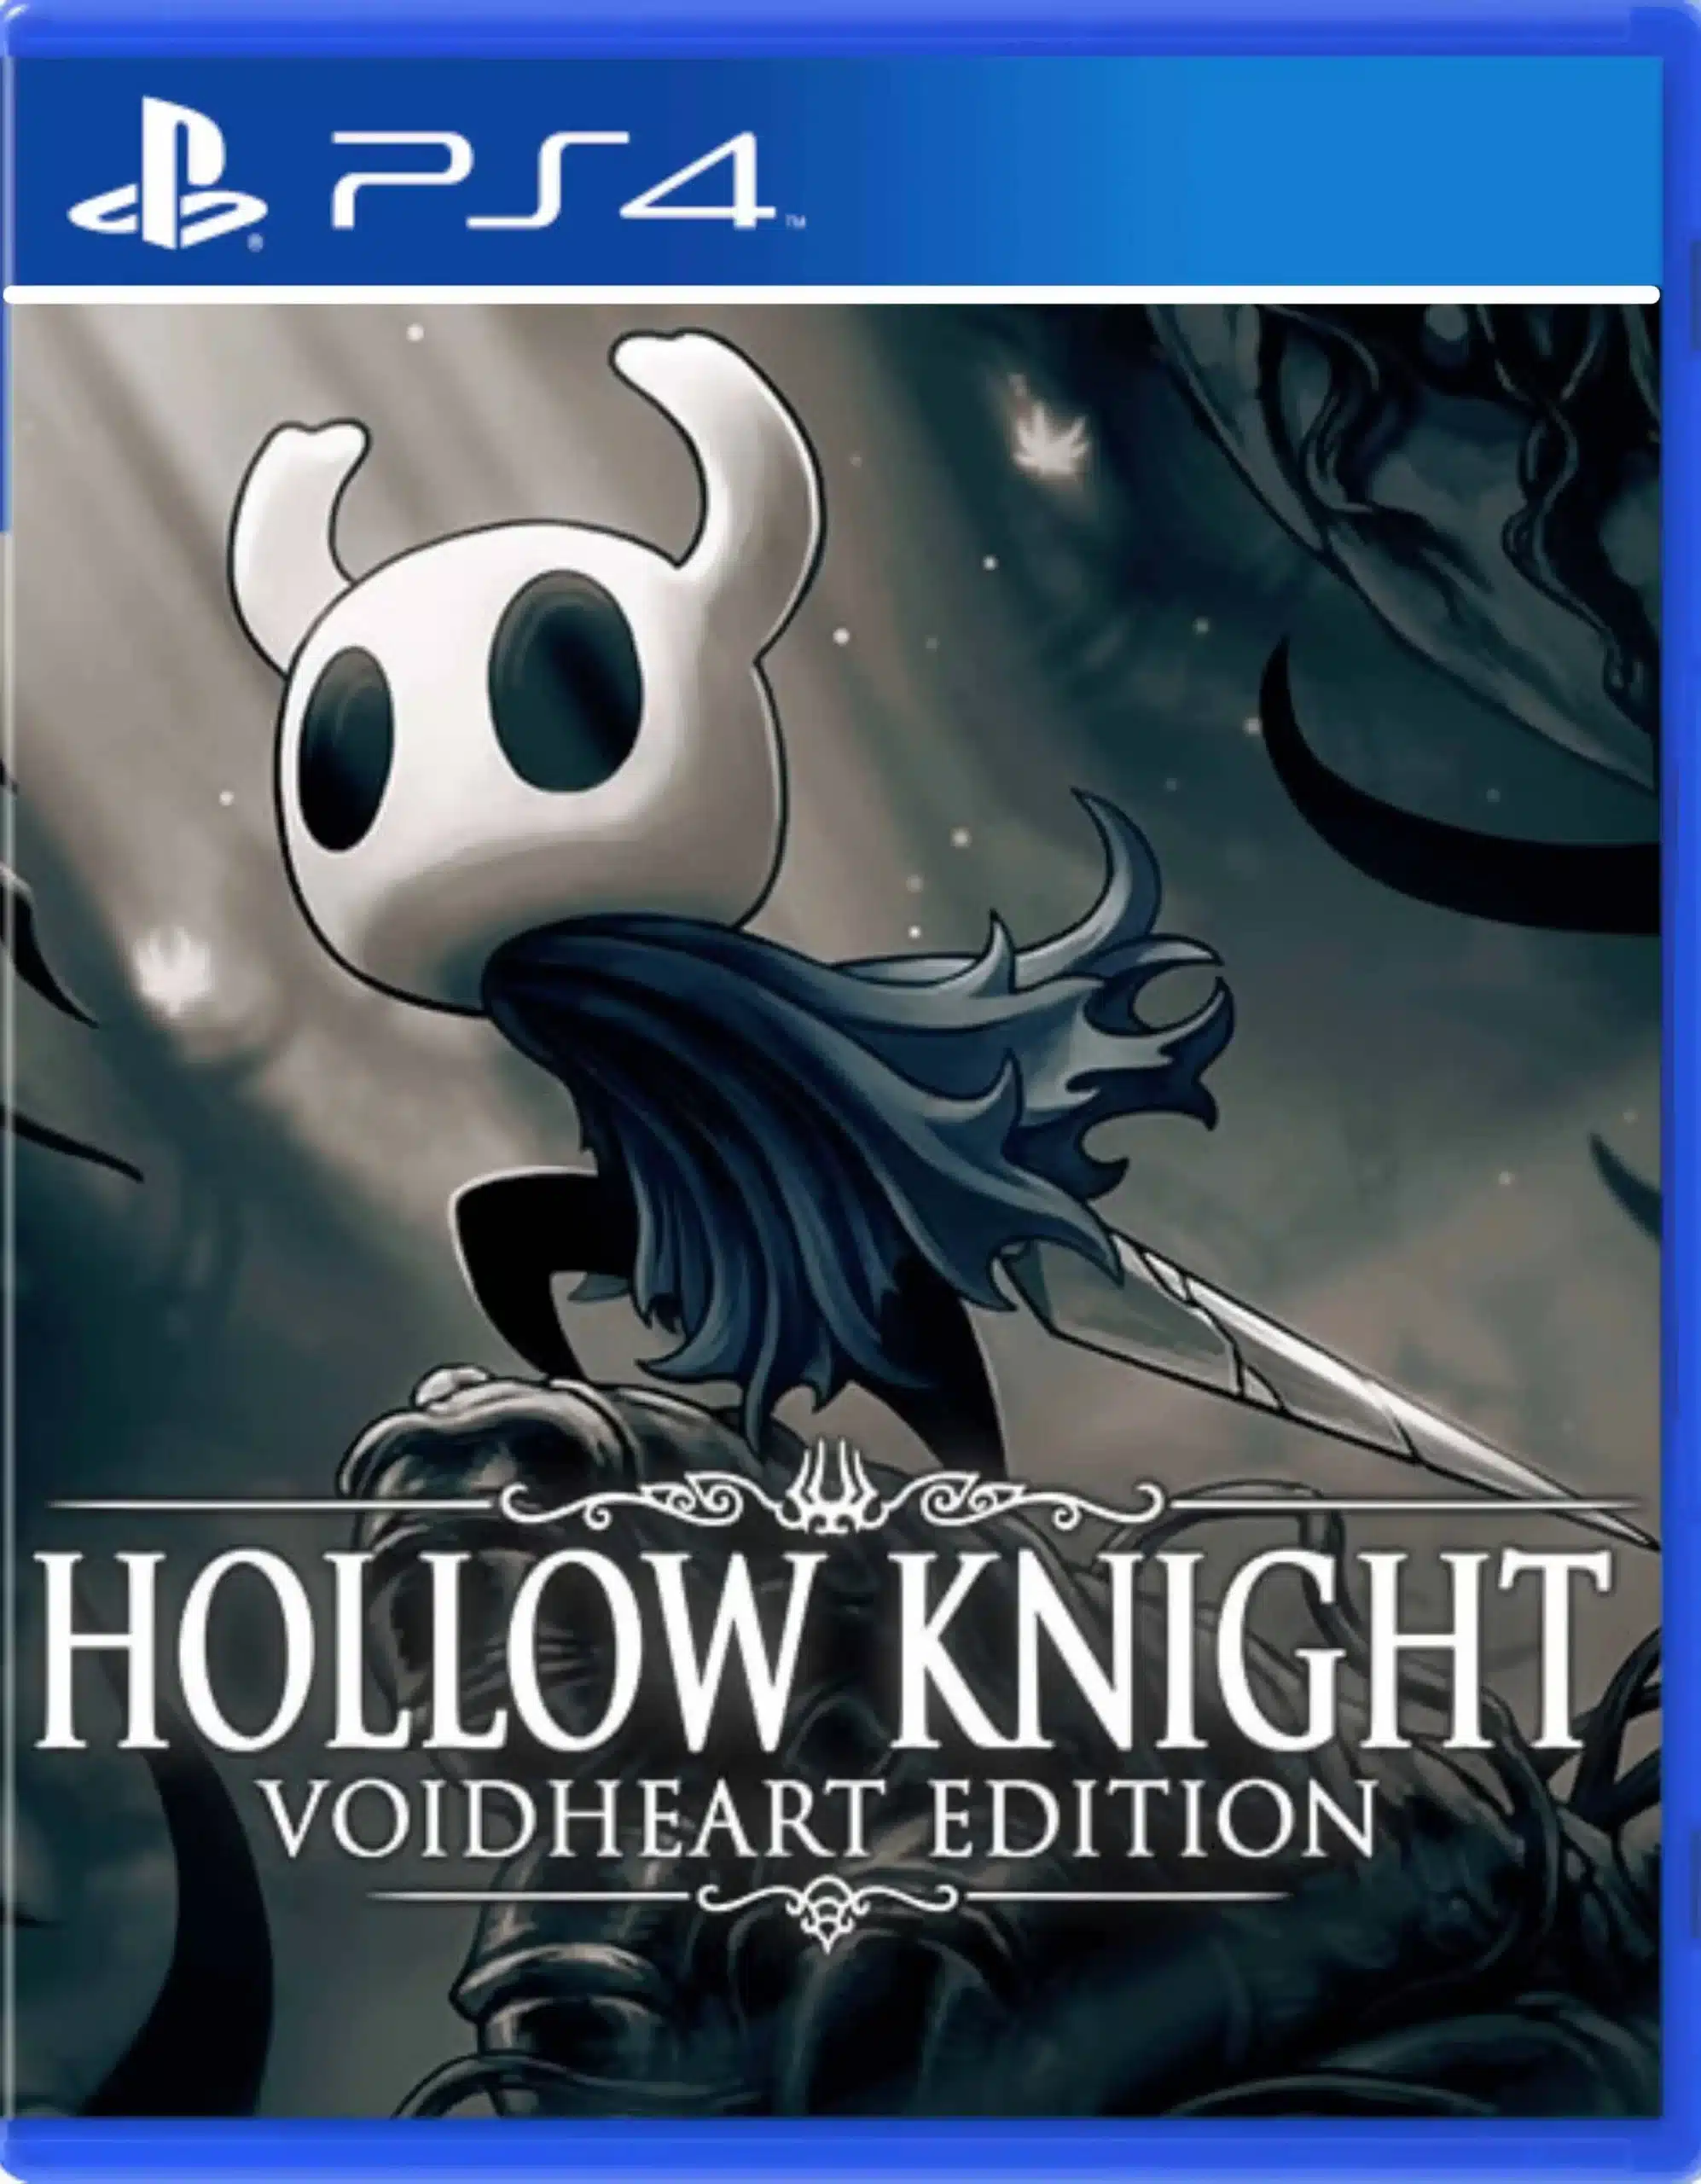 Hollow Knight Voidheart Edition PS4, Juegos Digitales Chile